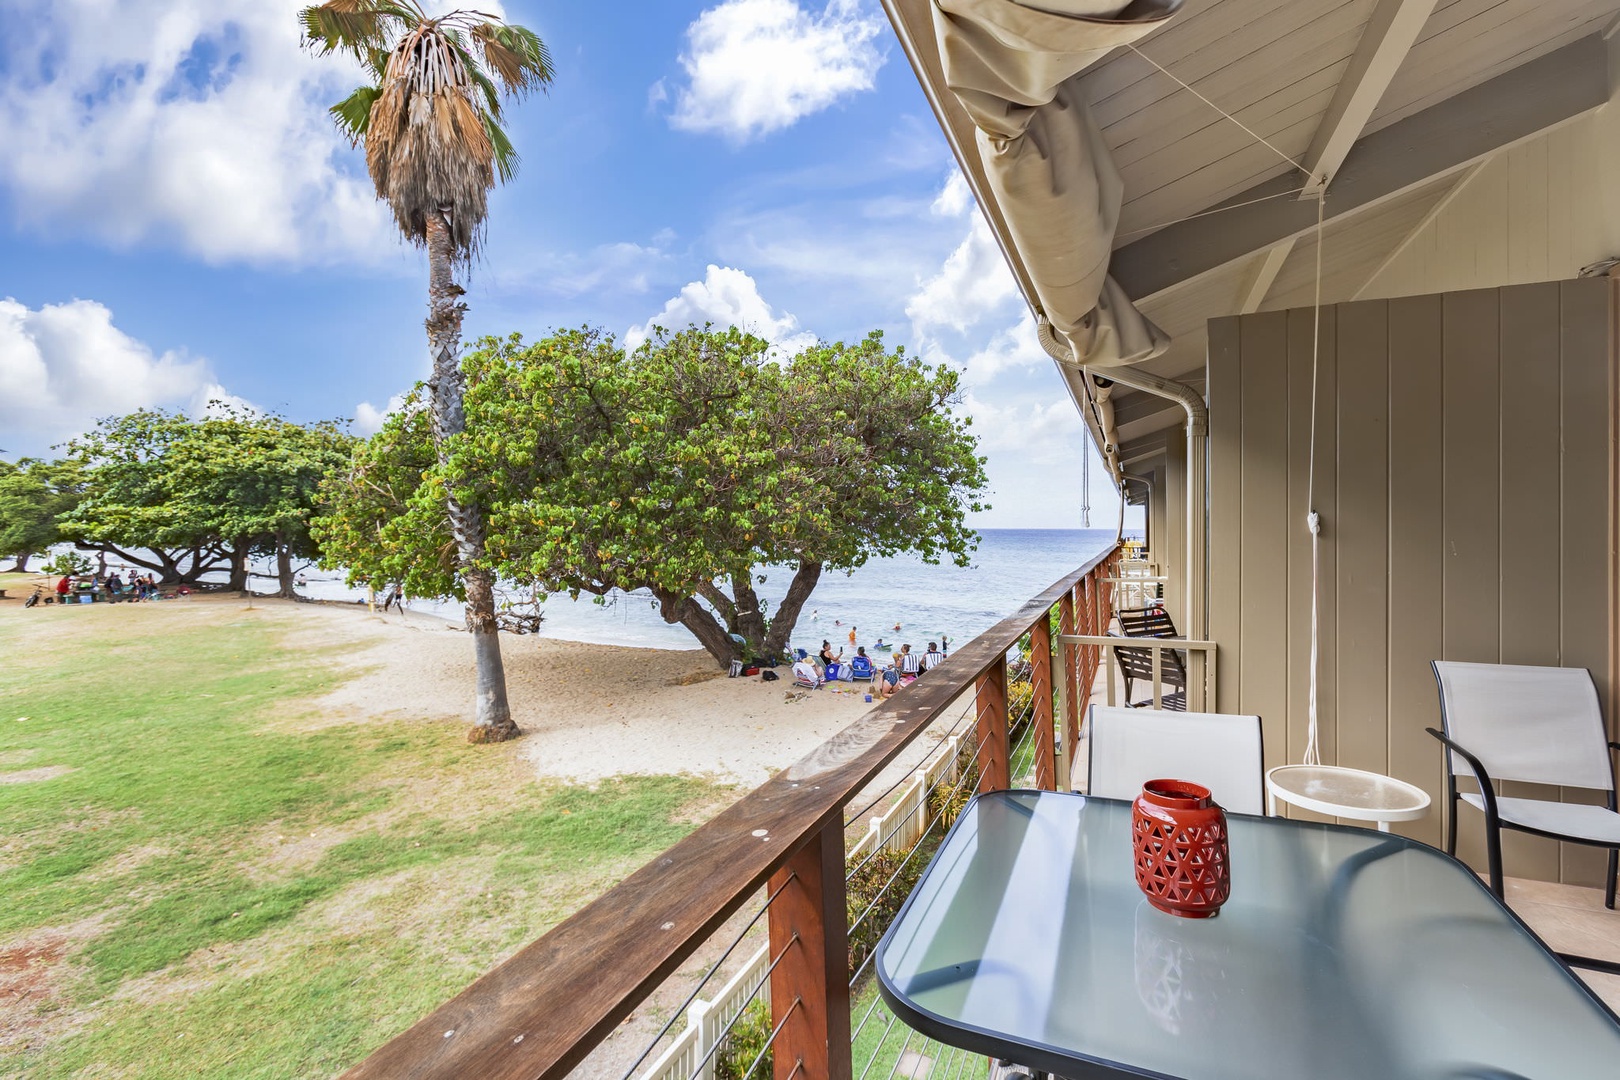 Start your day off with a nice cup of coffee and soak in some beach views. Outdoor dining on the lanai for up to 4